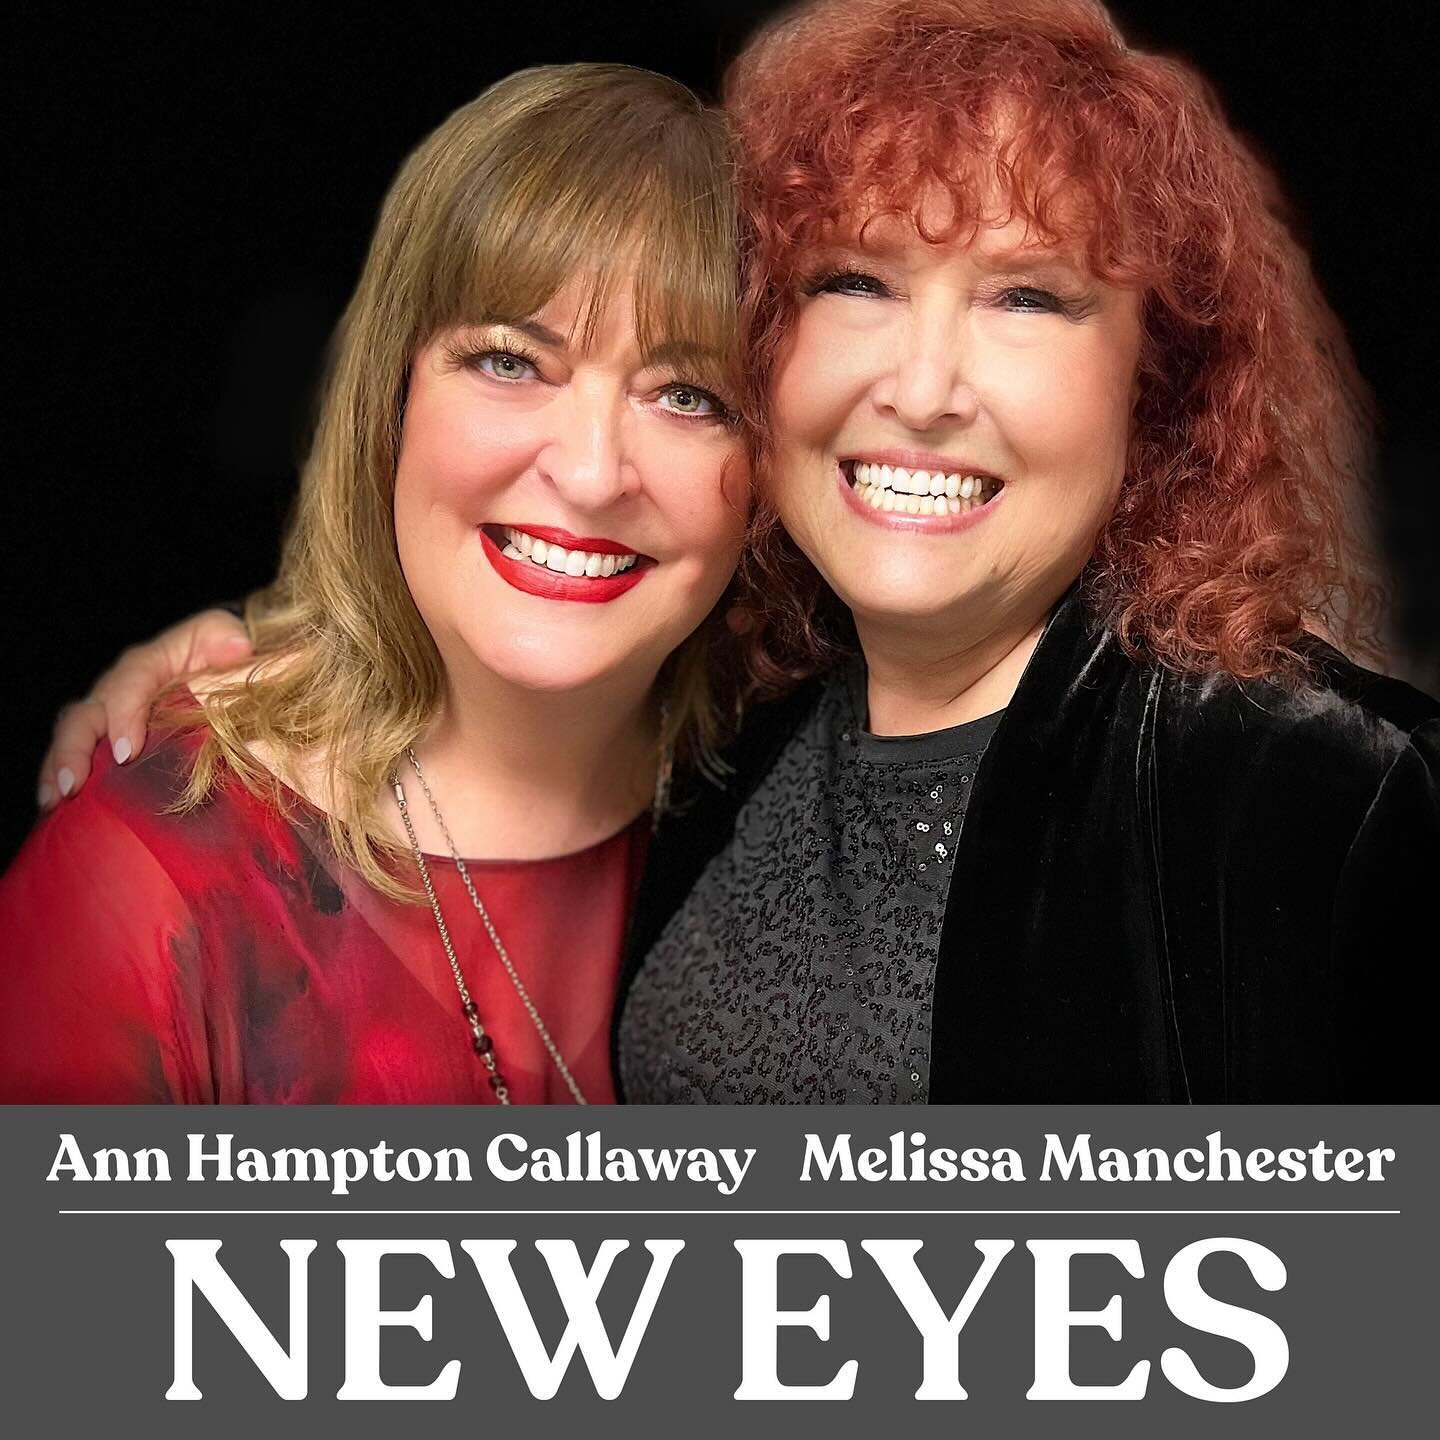 The latest from @ahcallaway NEW EYES with @melissa.manchester is available everywhere NOW! Link in bio! #neweyes #jazz #annhamptoncallaway #melissamanchester